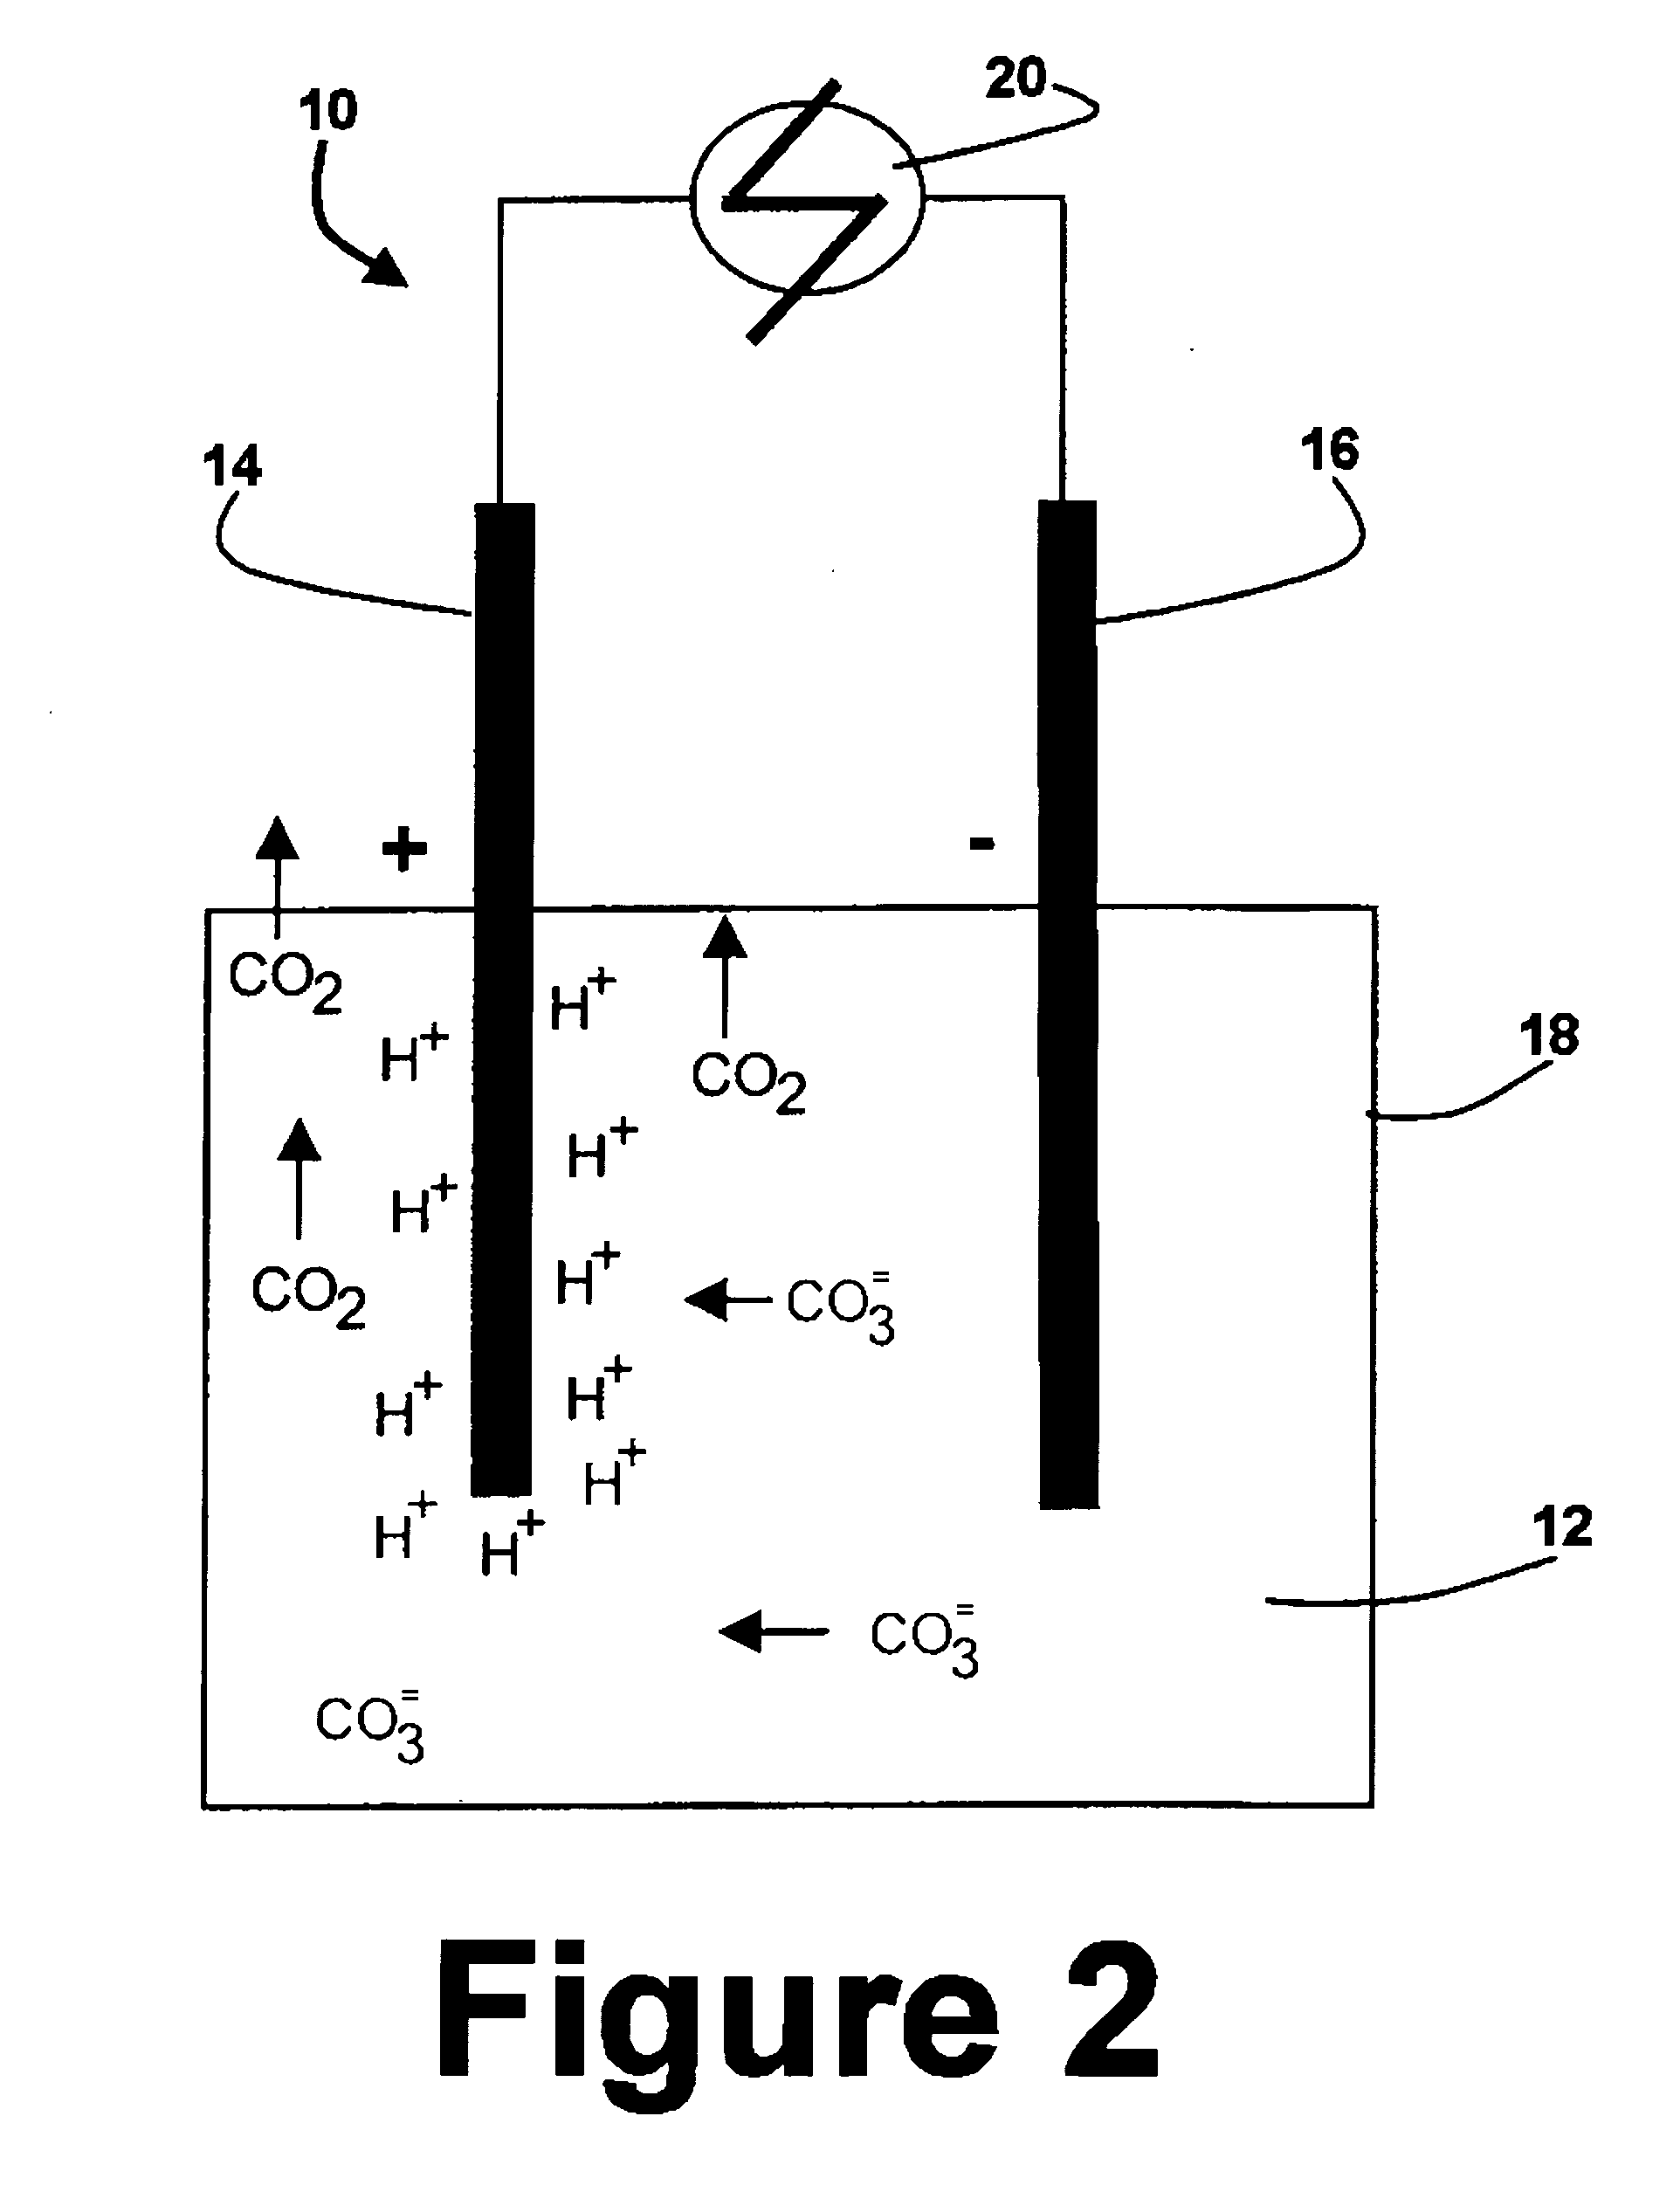 Remote emergency power unit having electrochemically regenerated carbon dioxide scrubber